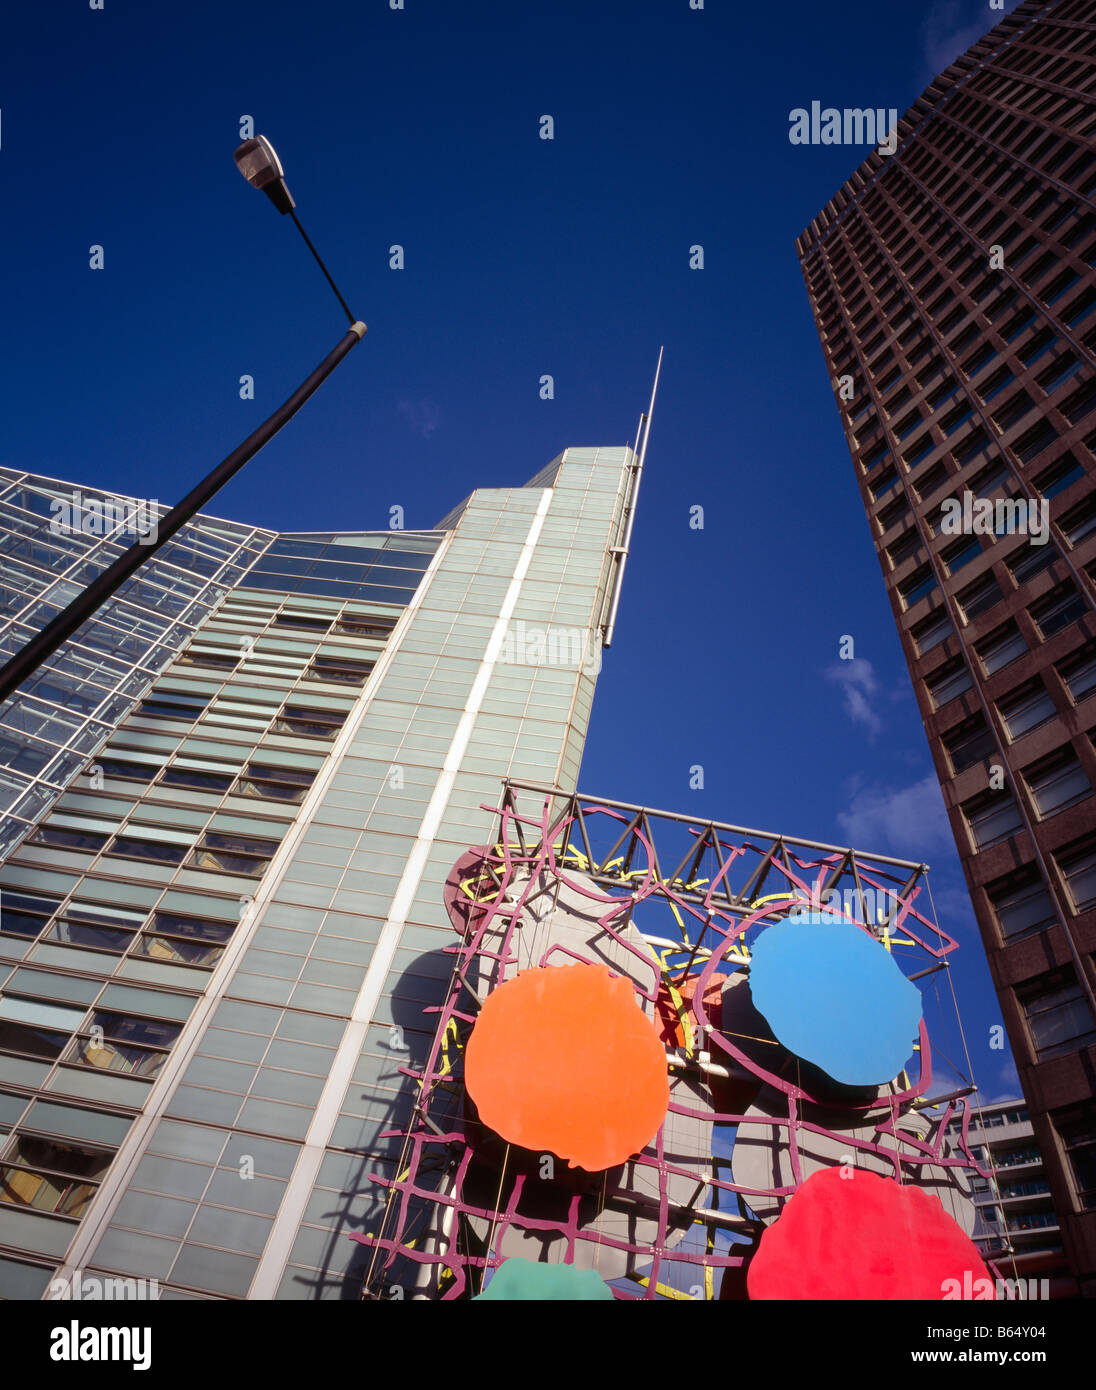 Tall buildings and modern art. Bressenden Place, Victoria, London, SW1, England, UK. Stock Photo